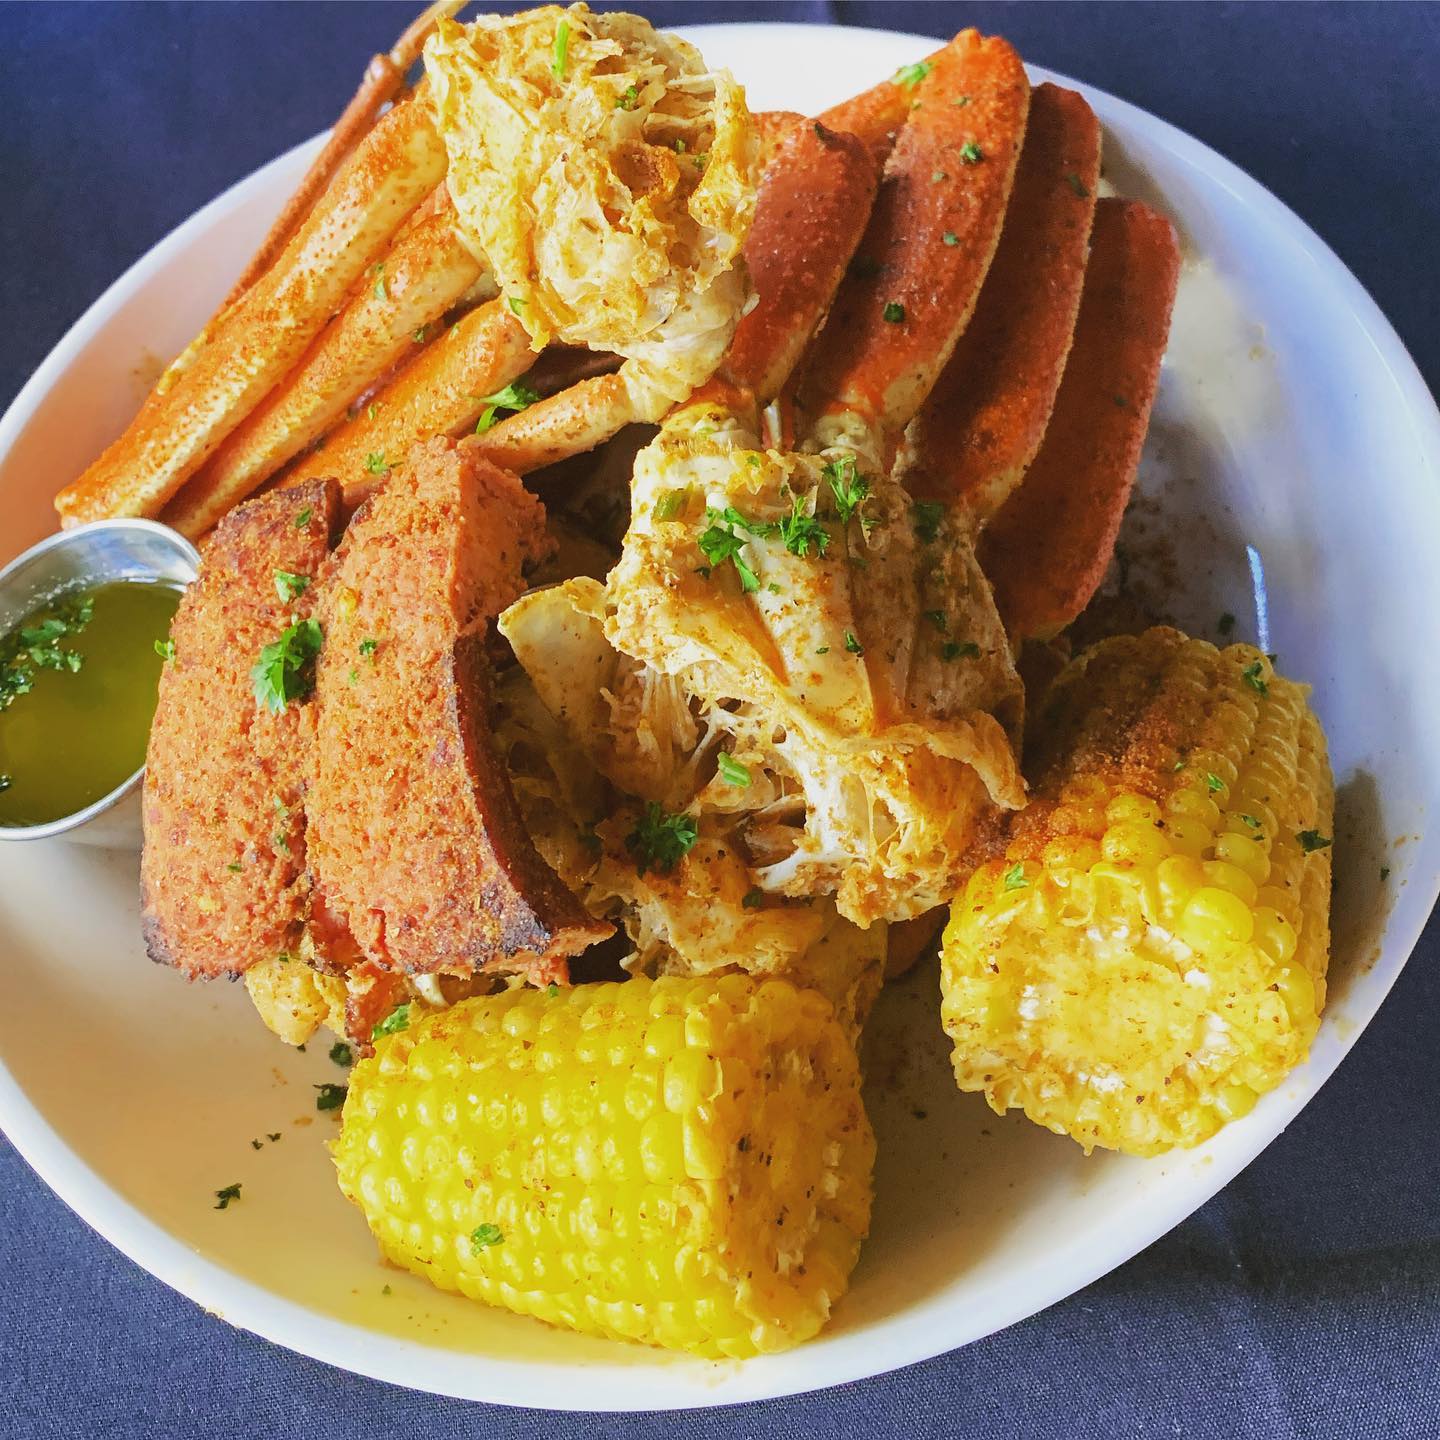 A plate of crab legs, butter, and corn on the cob from Sweet Auburn Seafood